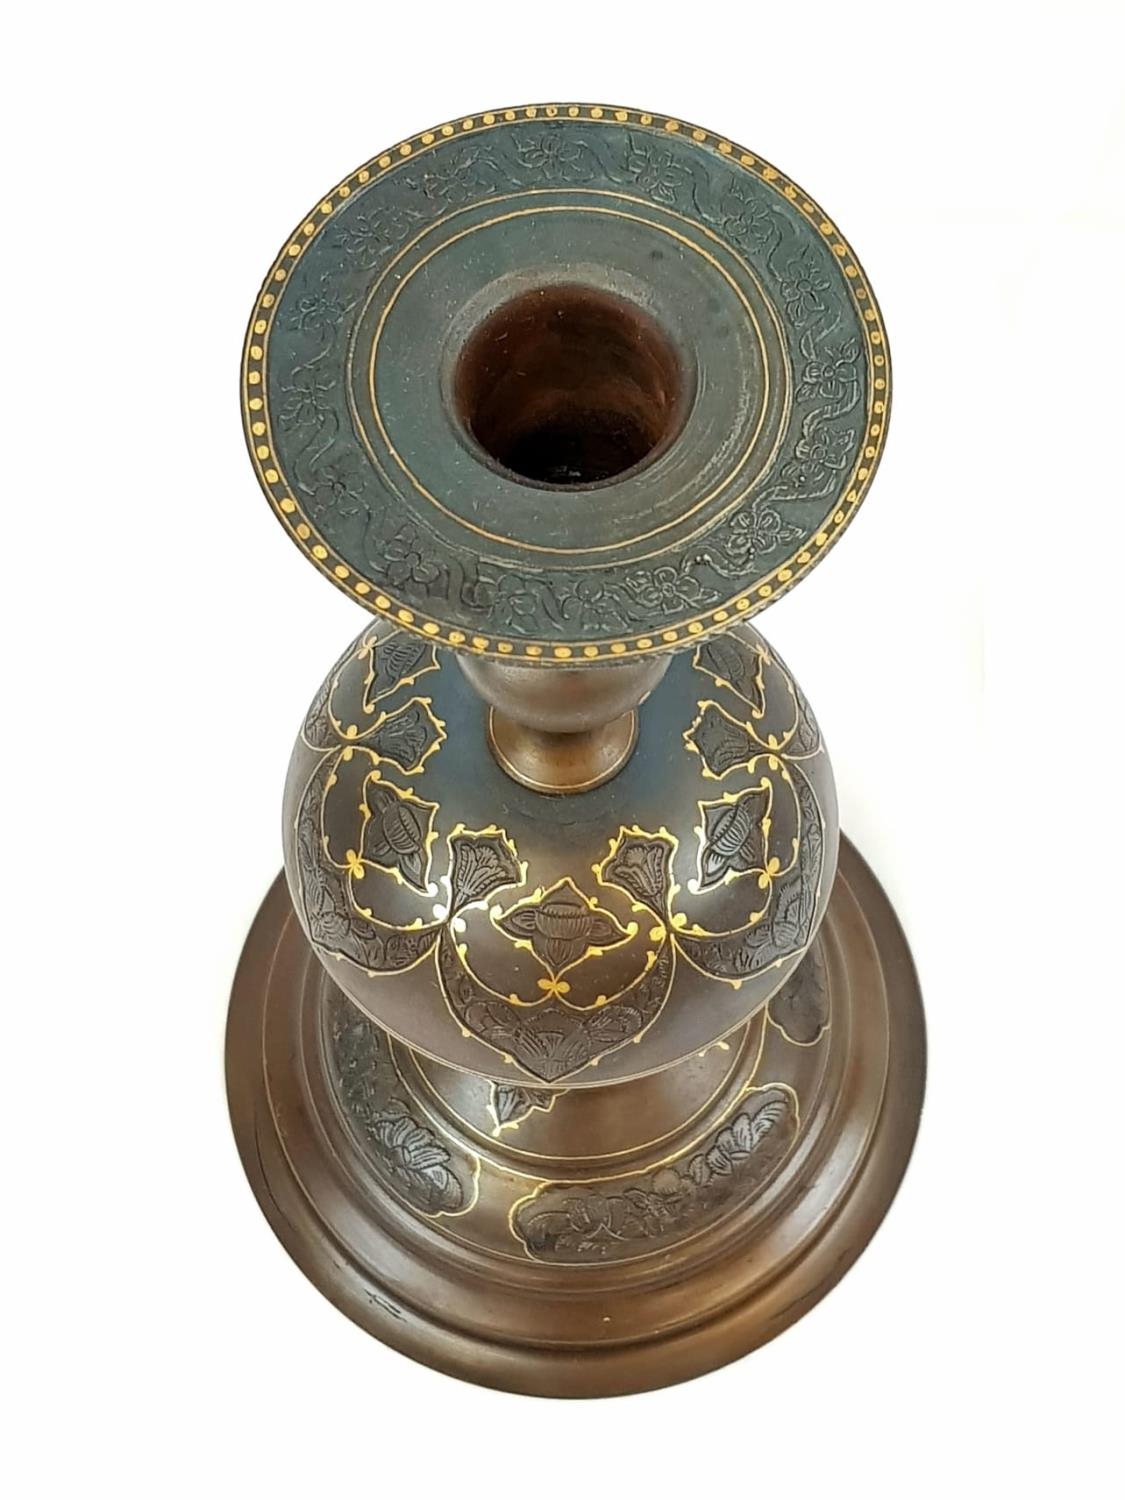 UNUSUAL PAIR OF STILL CANDLESTICKS WITH GOLD INLAY THOUGHT TO BE OF PERSIAN ORIGIN, STANDING 35 CM - Image 3 of 3